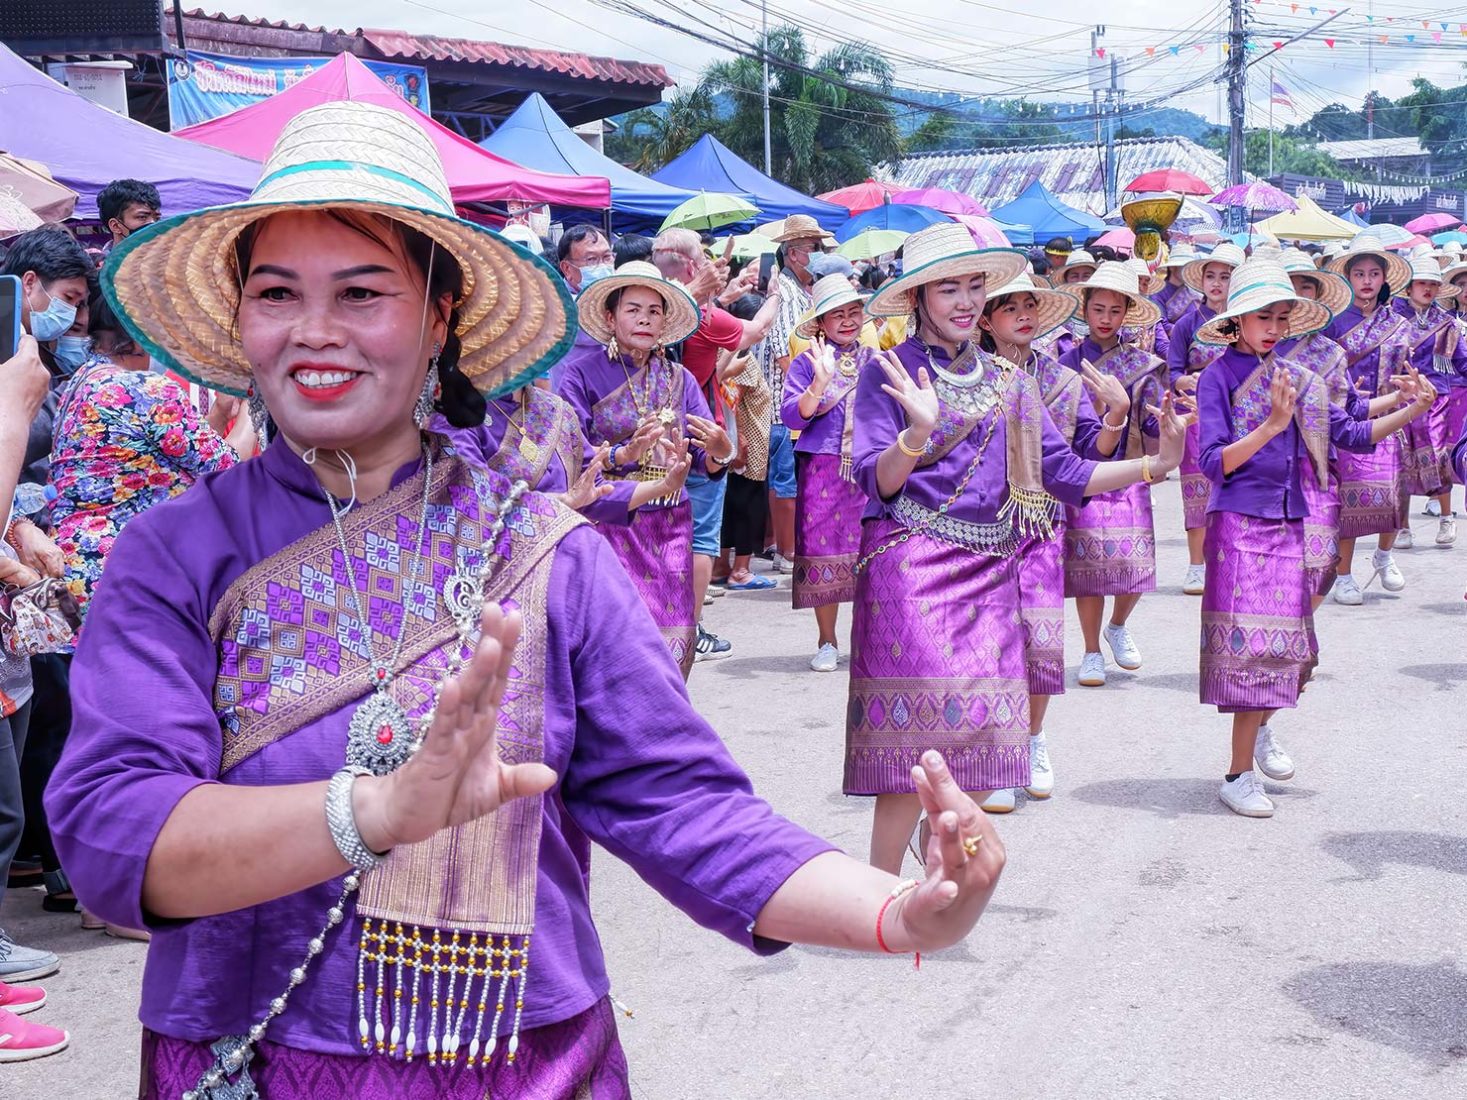 Women perform traditional dances along the parade route